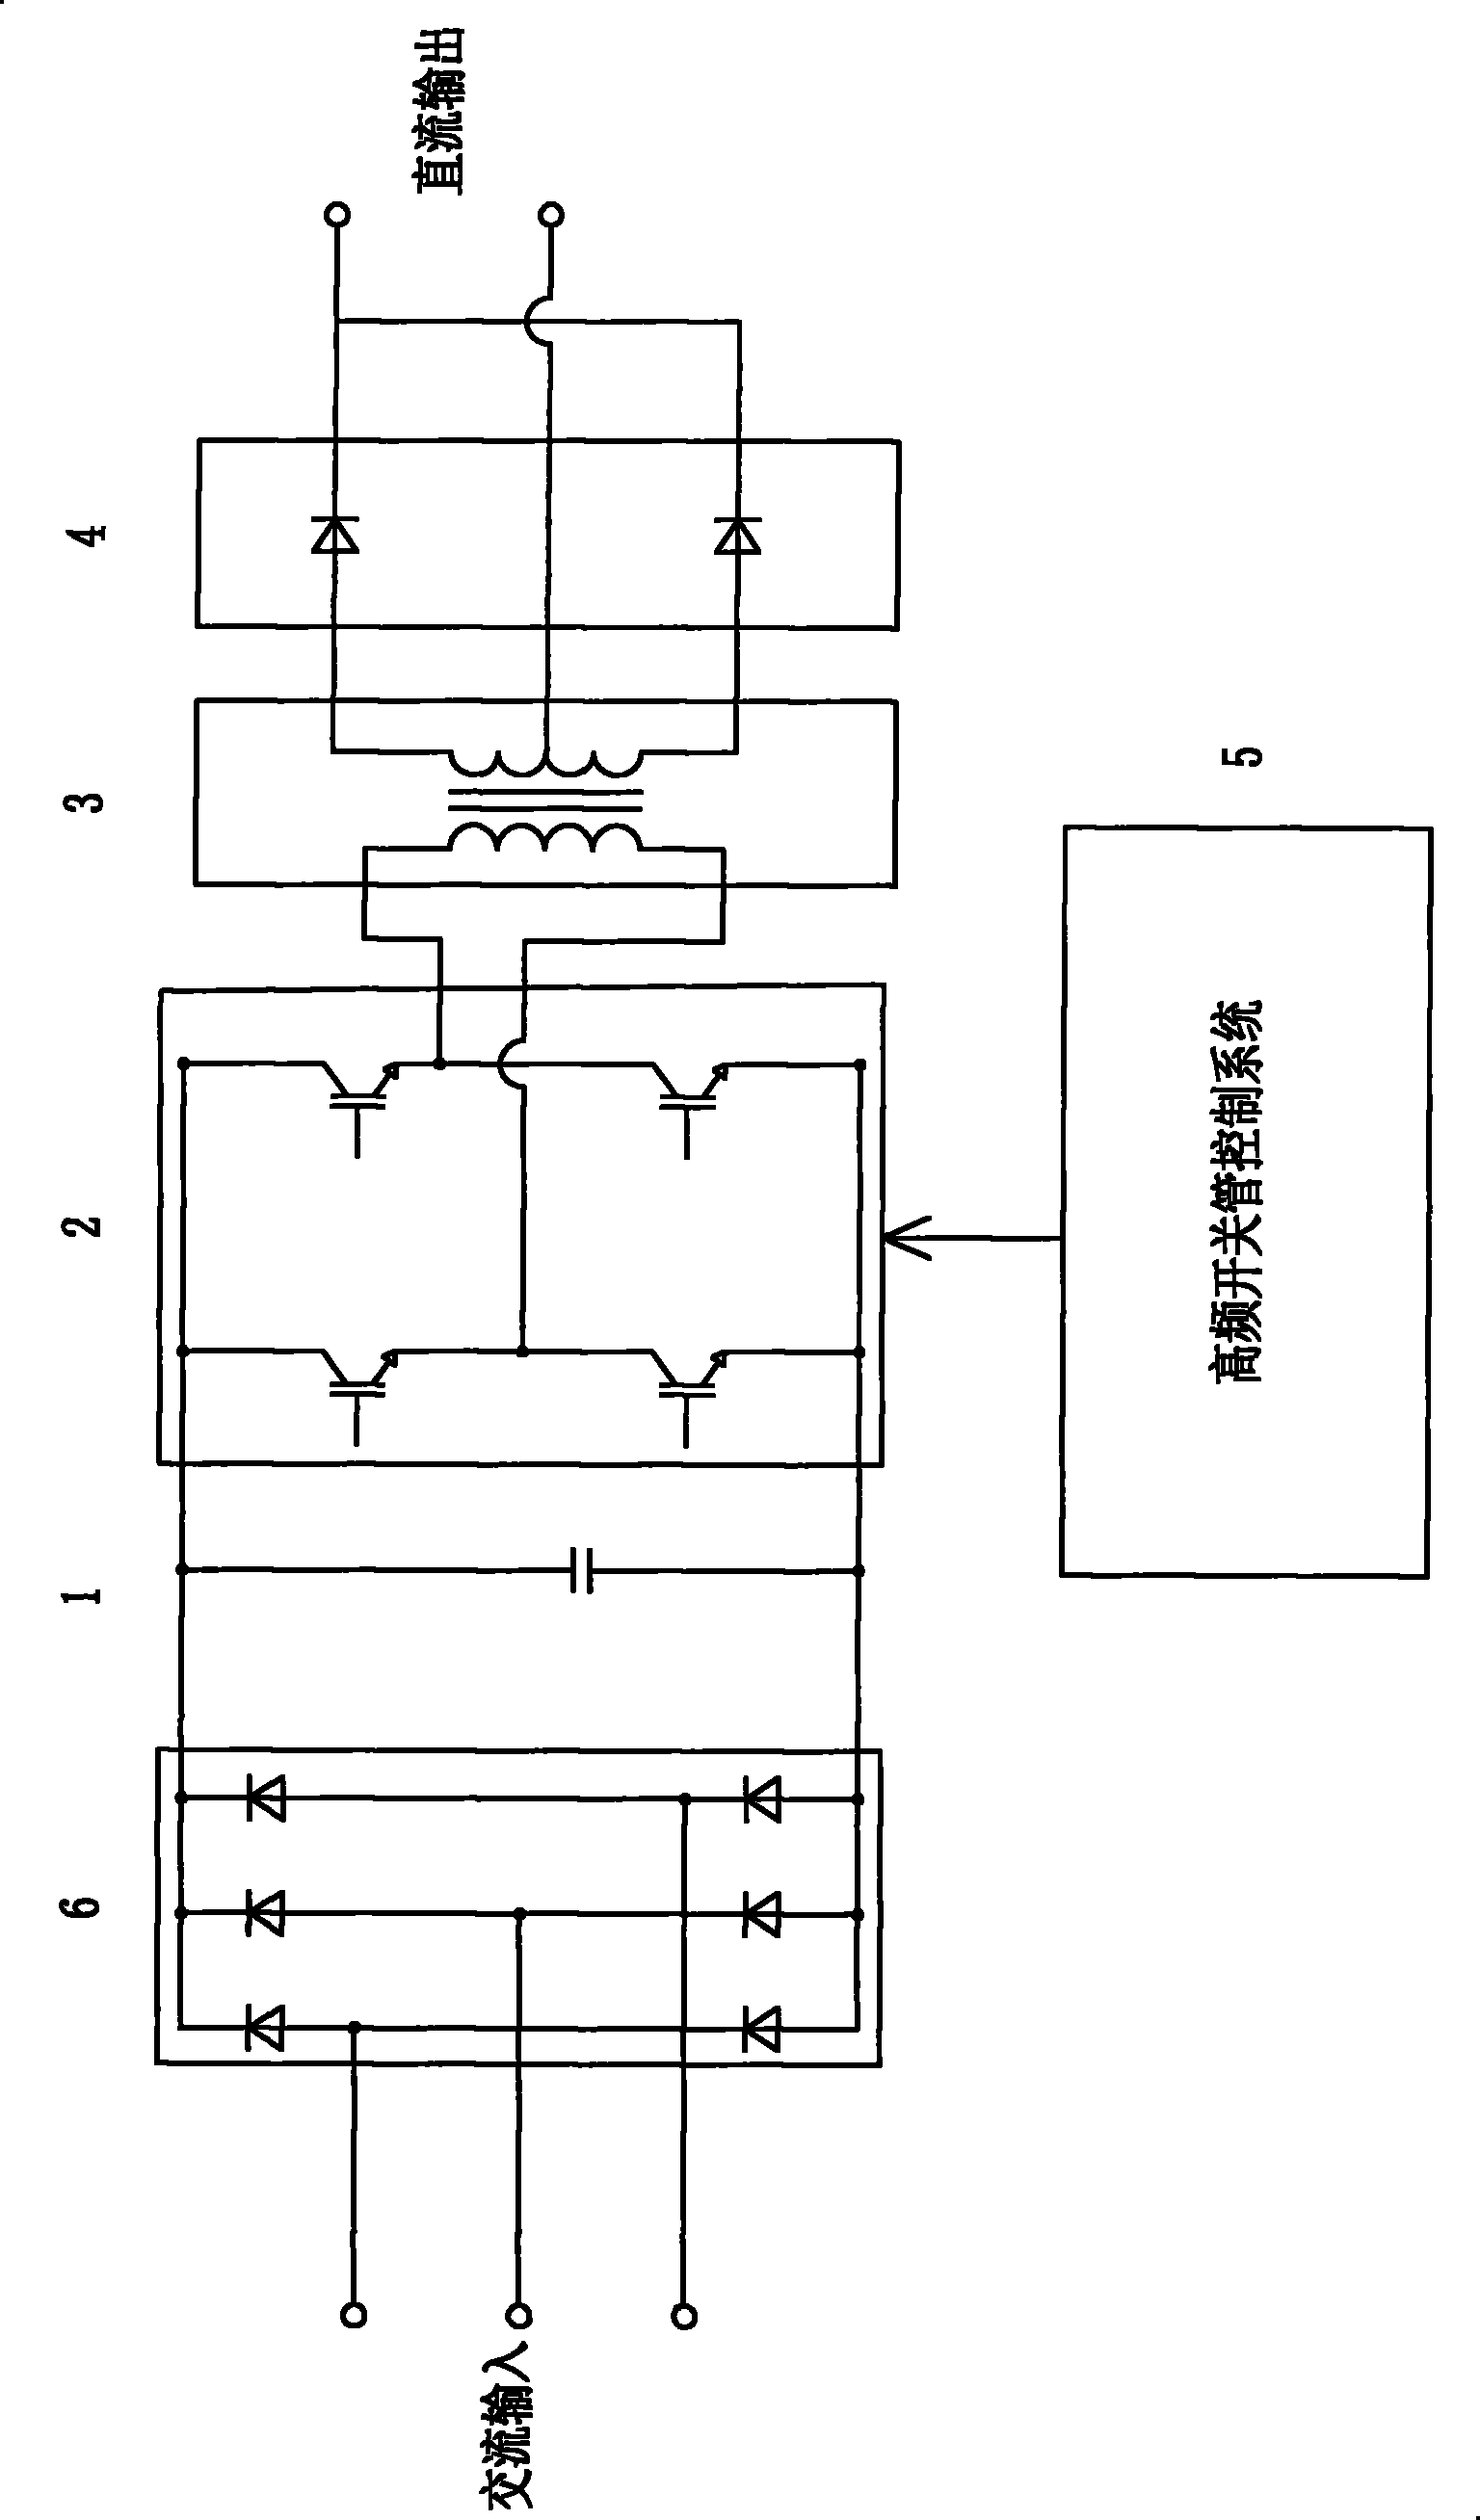 High-frequency switch rectifying power supply with wide-range direct current voltage output characteristic